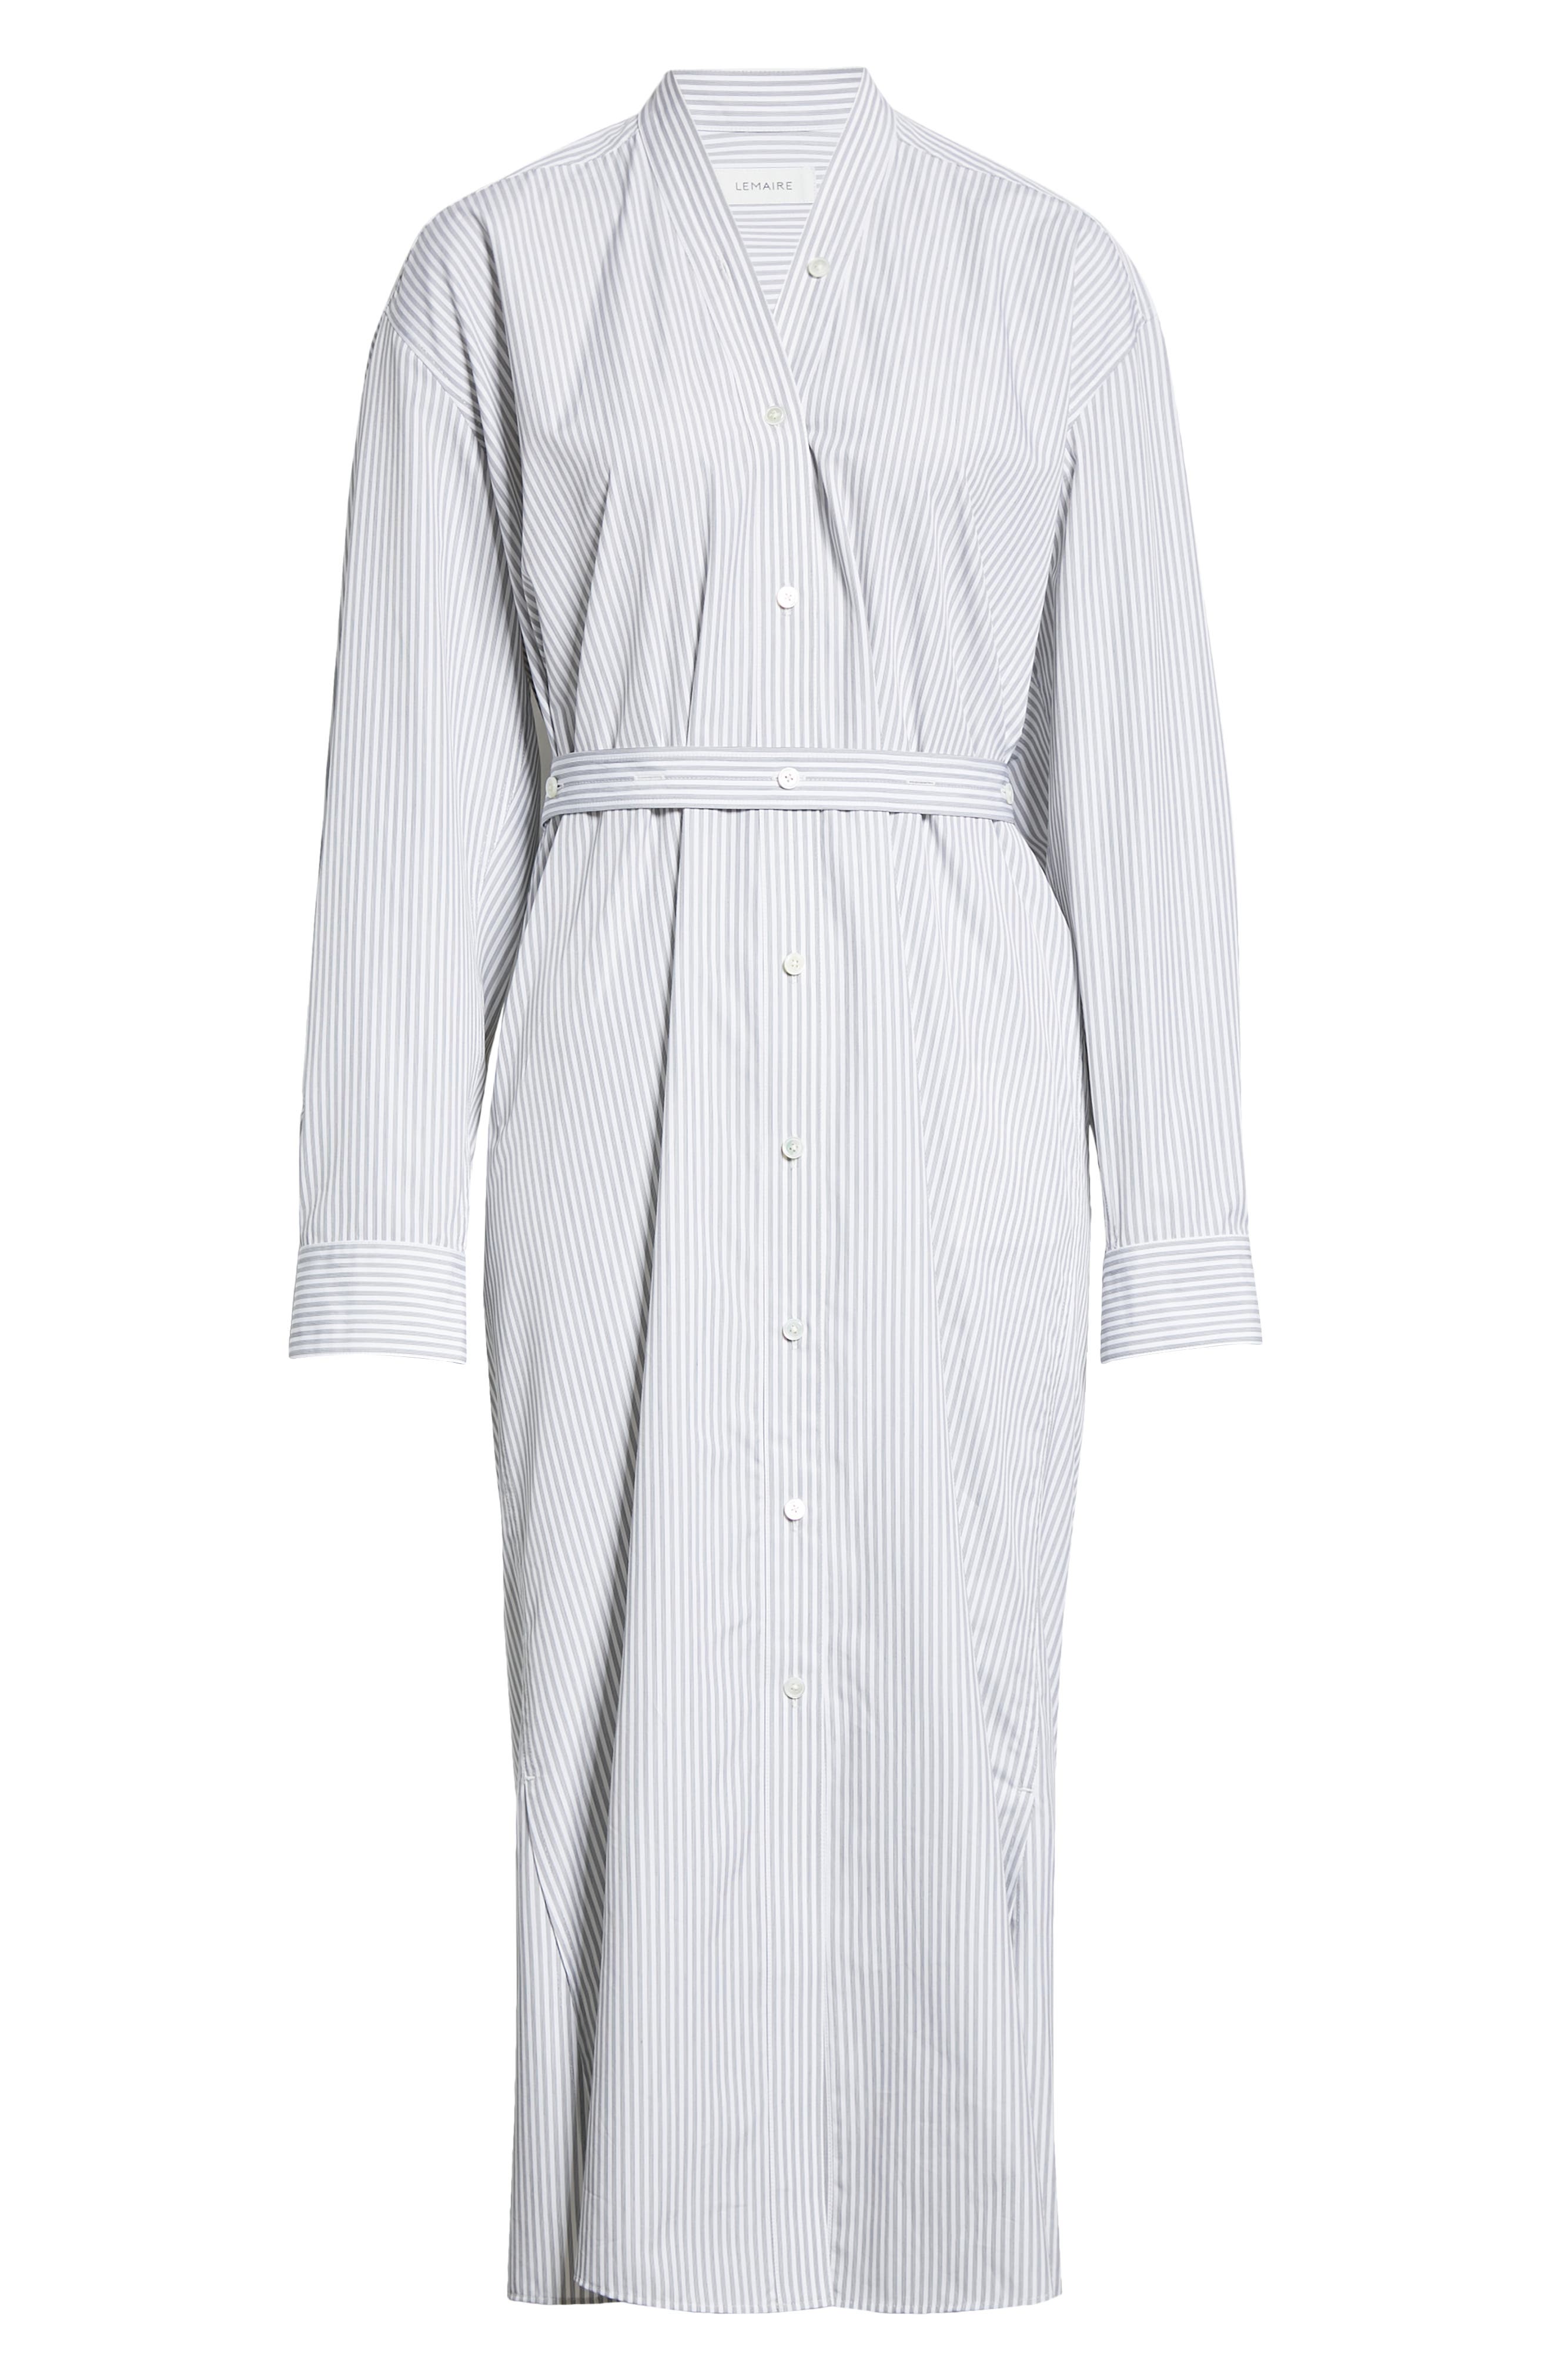 Lemaire Tilted Stripe Long Sleeve Cotton Shirtdress in White/Black 100